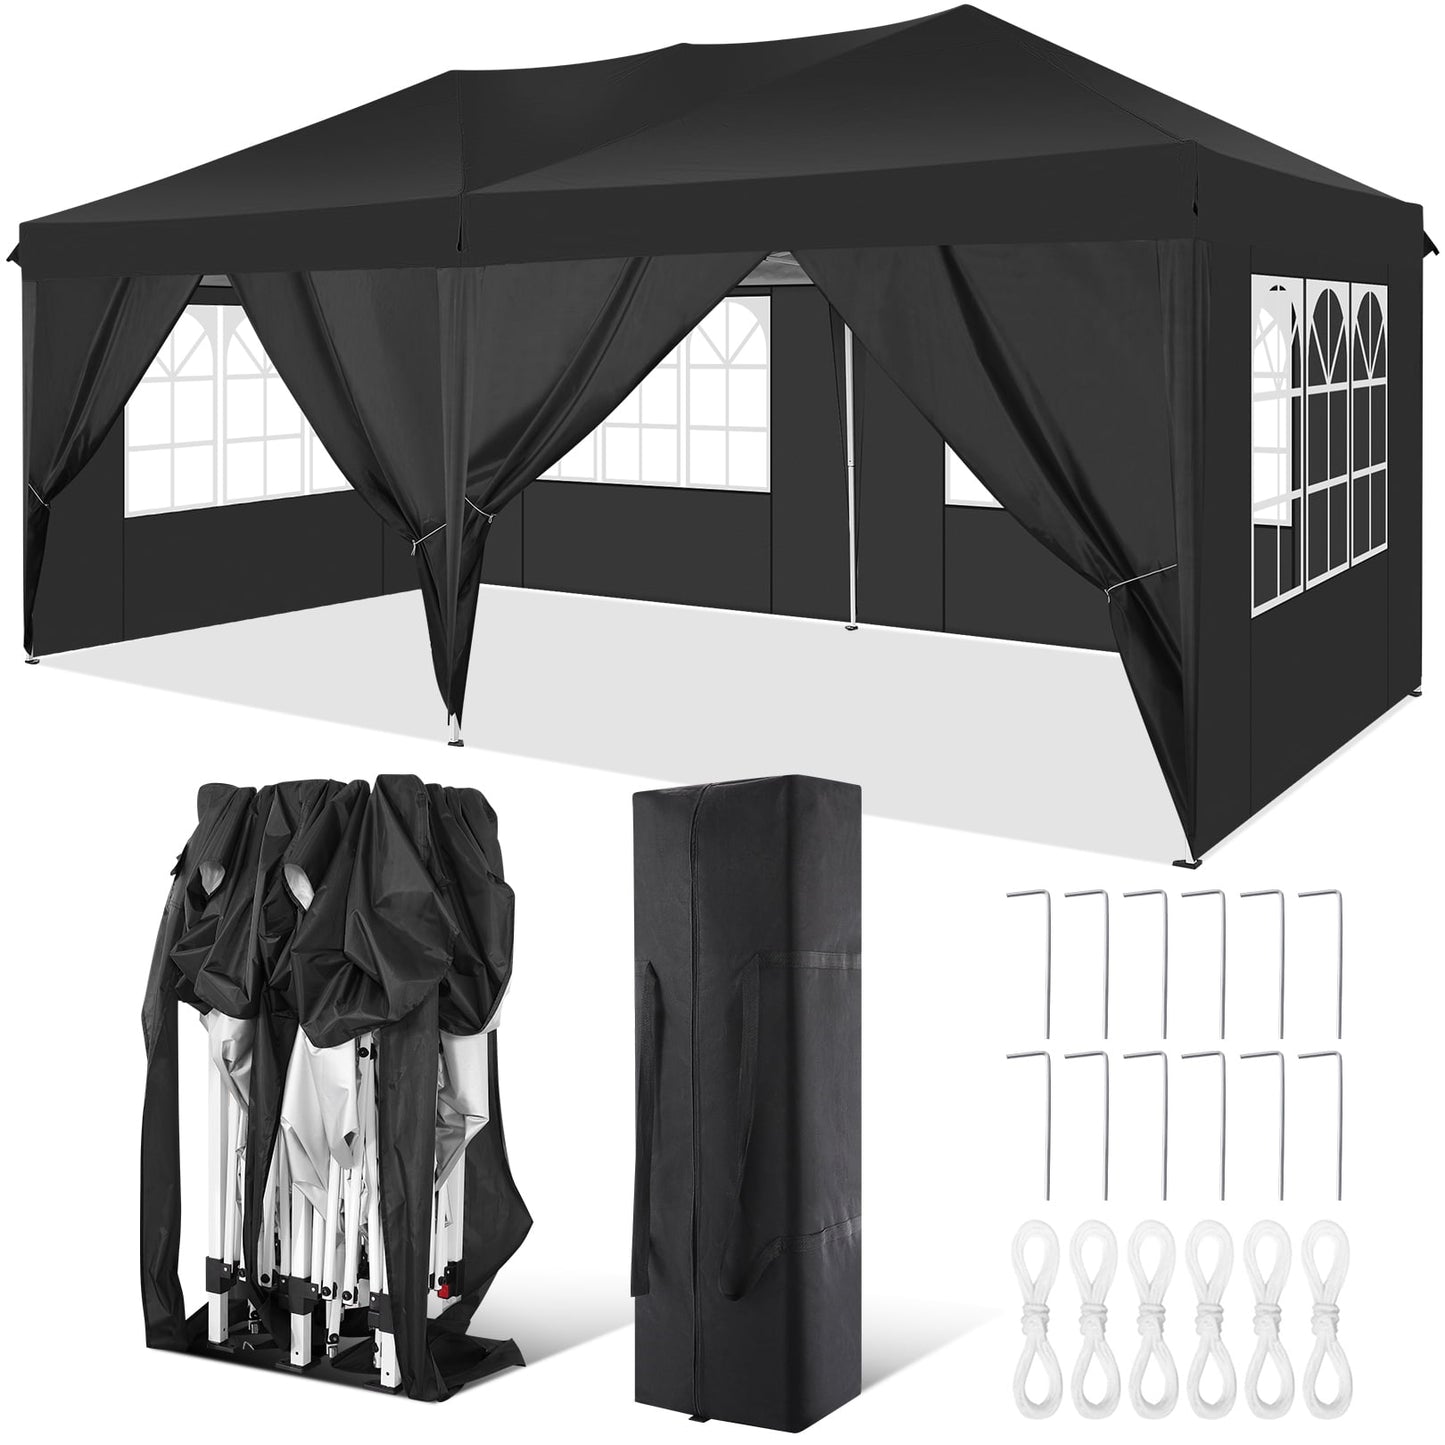 SANOPY 10' x 20' Canopy Tent EZ Pop Up Party Tent Portable Instant Commercial Heavy Duty Outdoor Market Shelter Gazebo with 6 Removable Sidewalls and Carry Bag, White